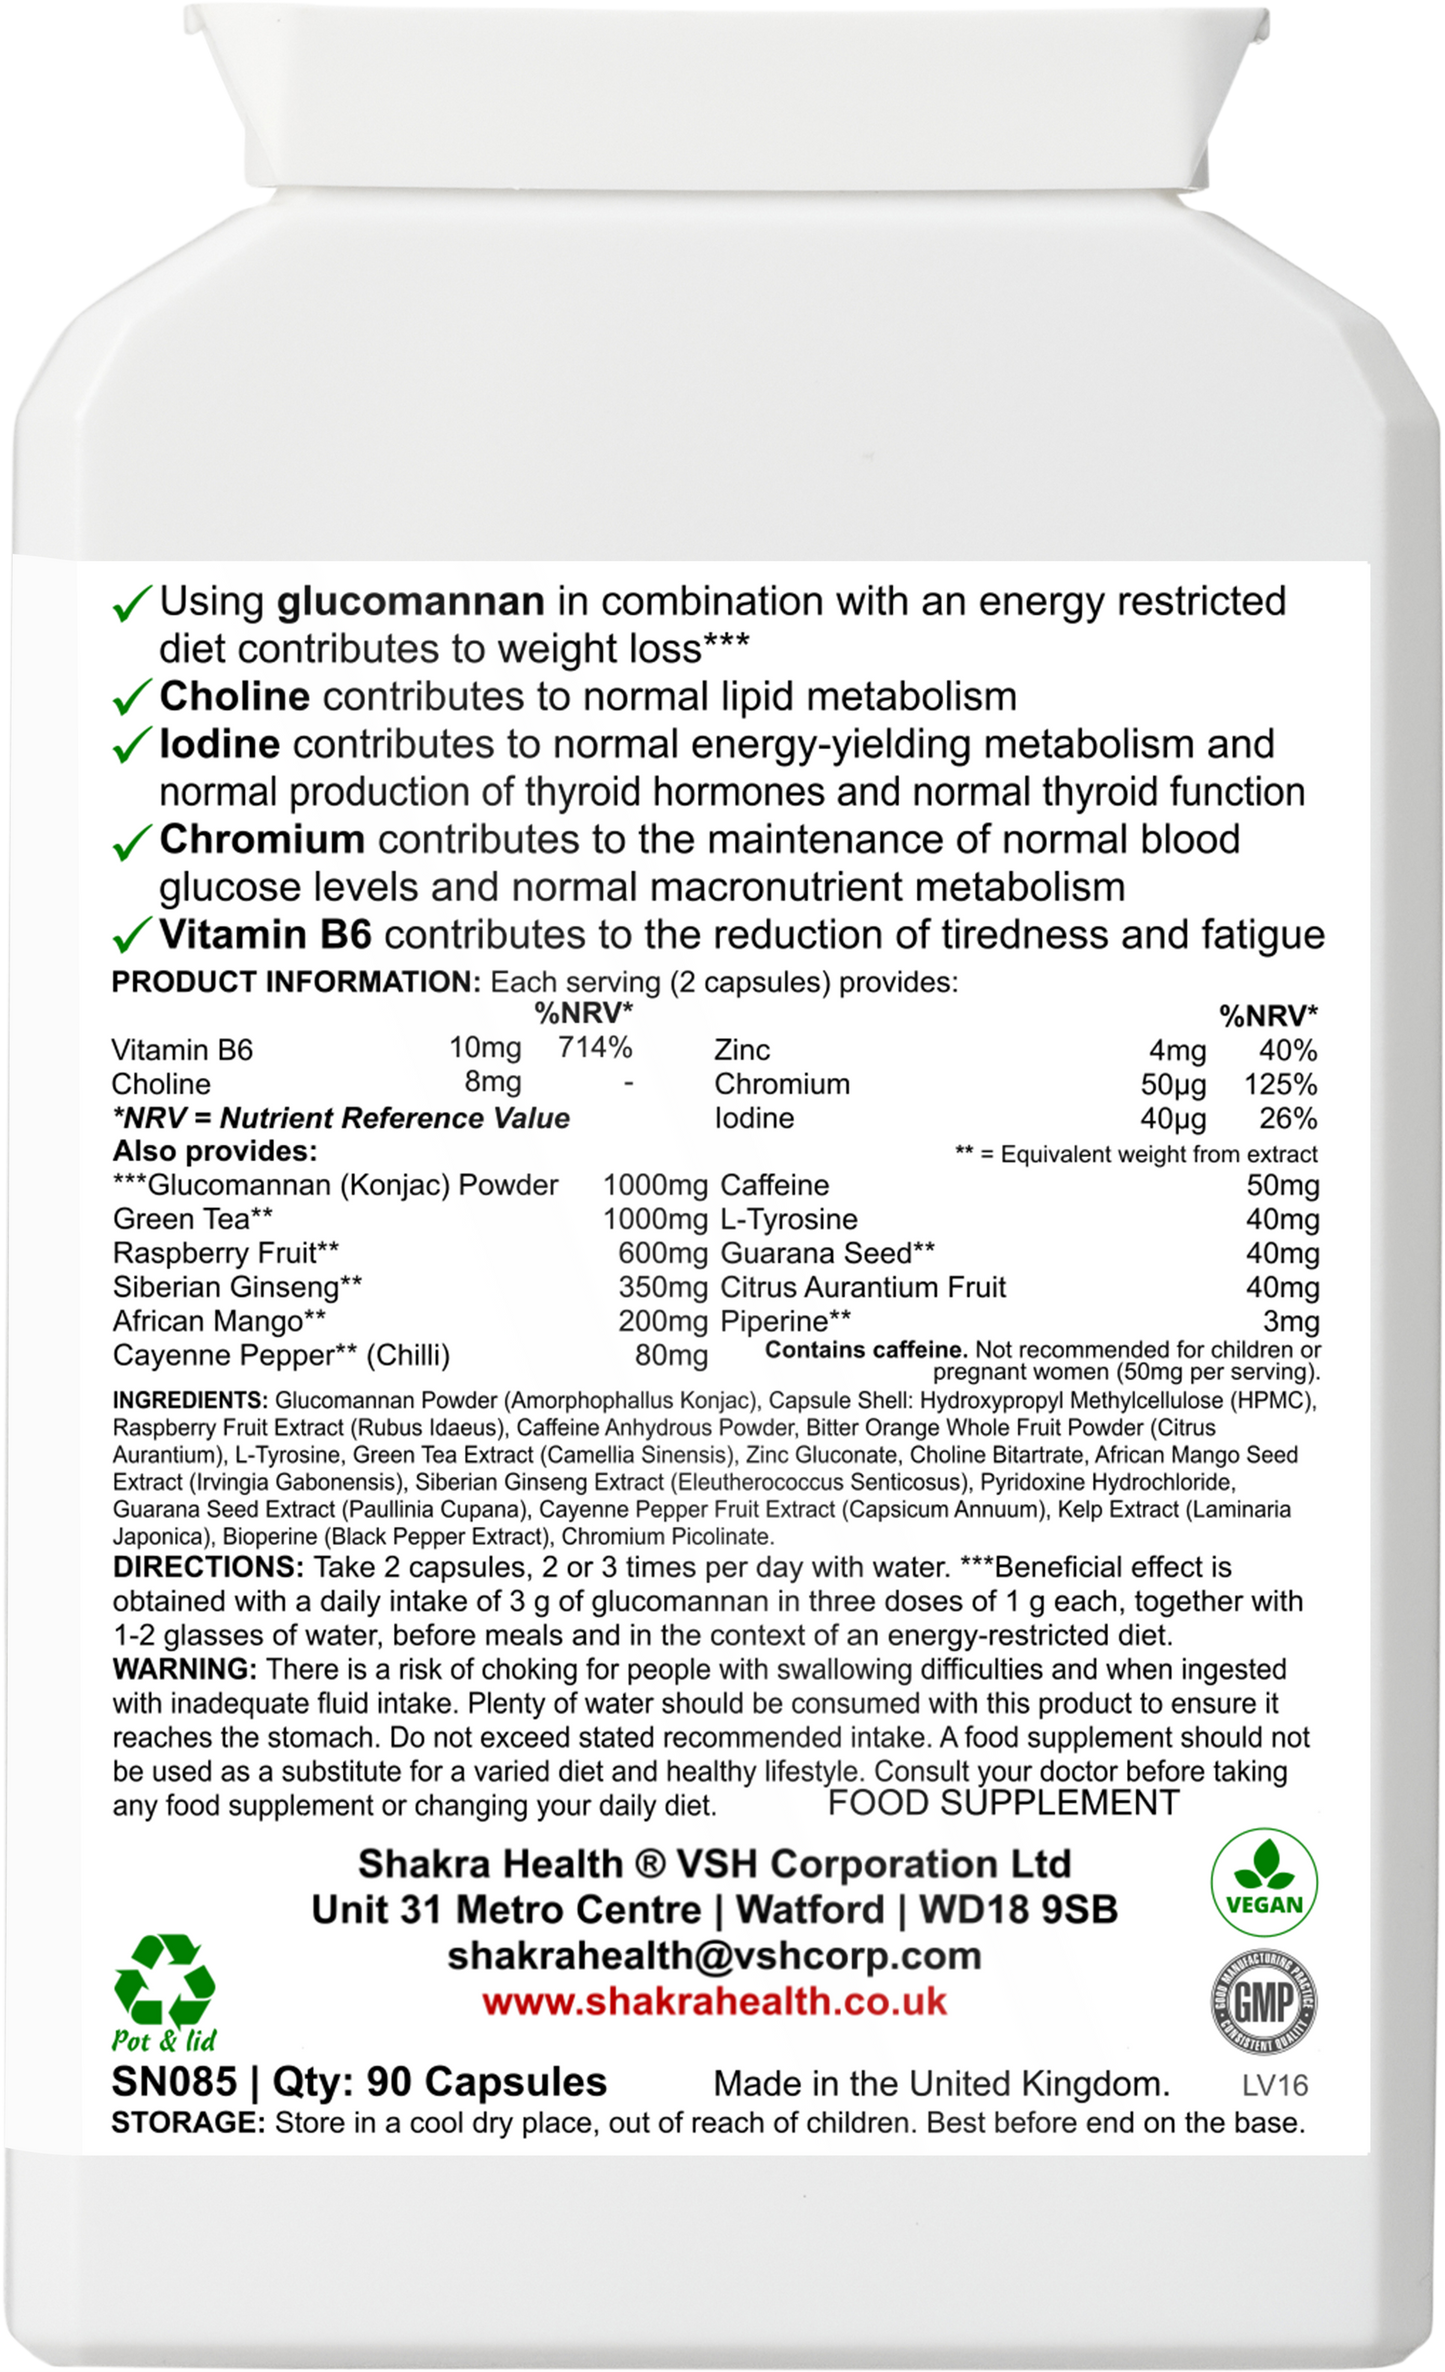 Buy Solar Slim Thermogenic Herbal Fat Metaboliser & Natural Weight Reduction Supplement - Reduce Your Belly Without Torturing Yourself. This thermogenic fat metaboliser & herbal weight management supplement, supports the body's natural fat burning processes, along with the feeling of fullness, energy levels, thyroid function, carbohydrate, lipid & fatty acid metabolism, stable blood sugar levels at Sacred Remedy Online